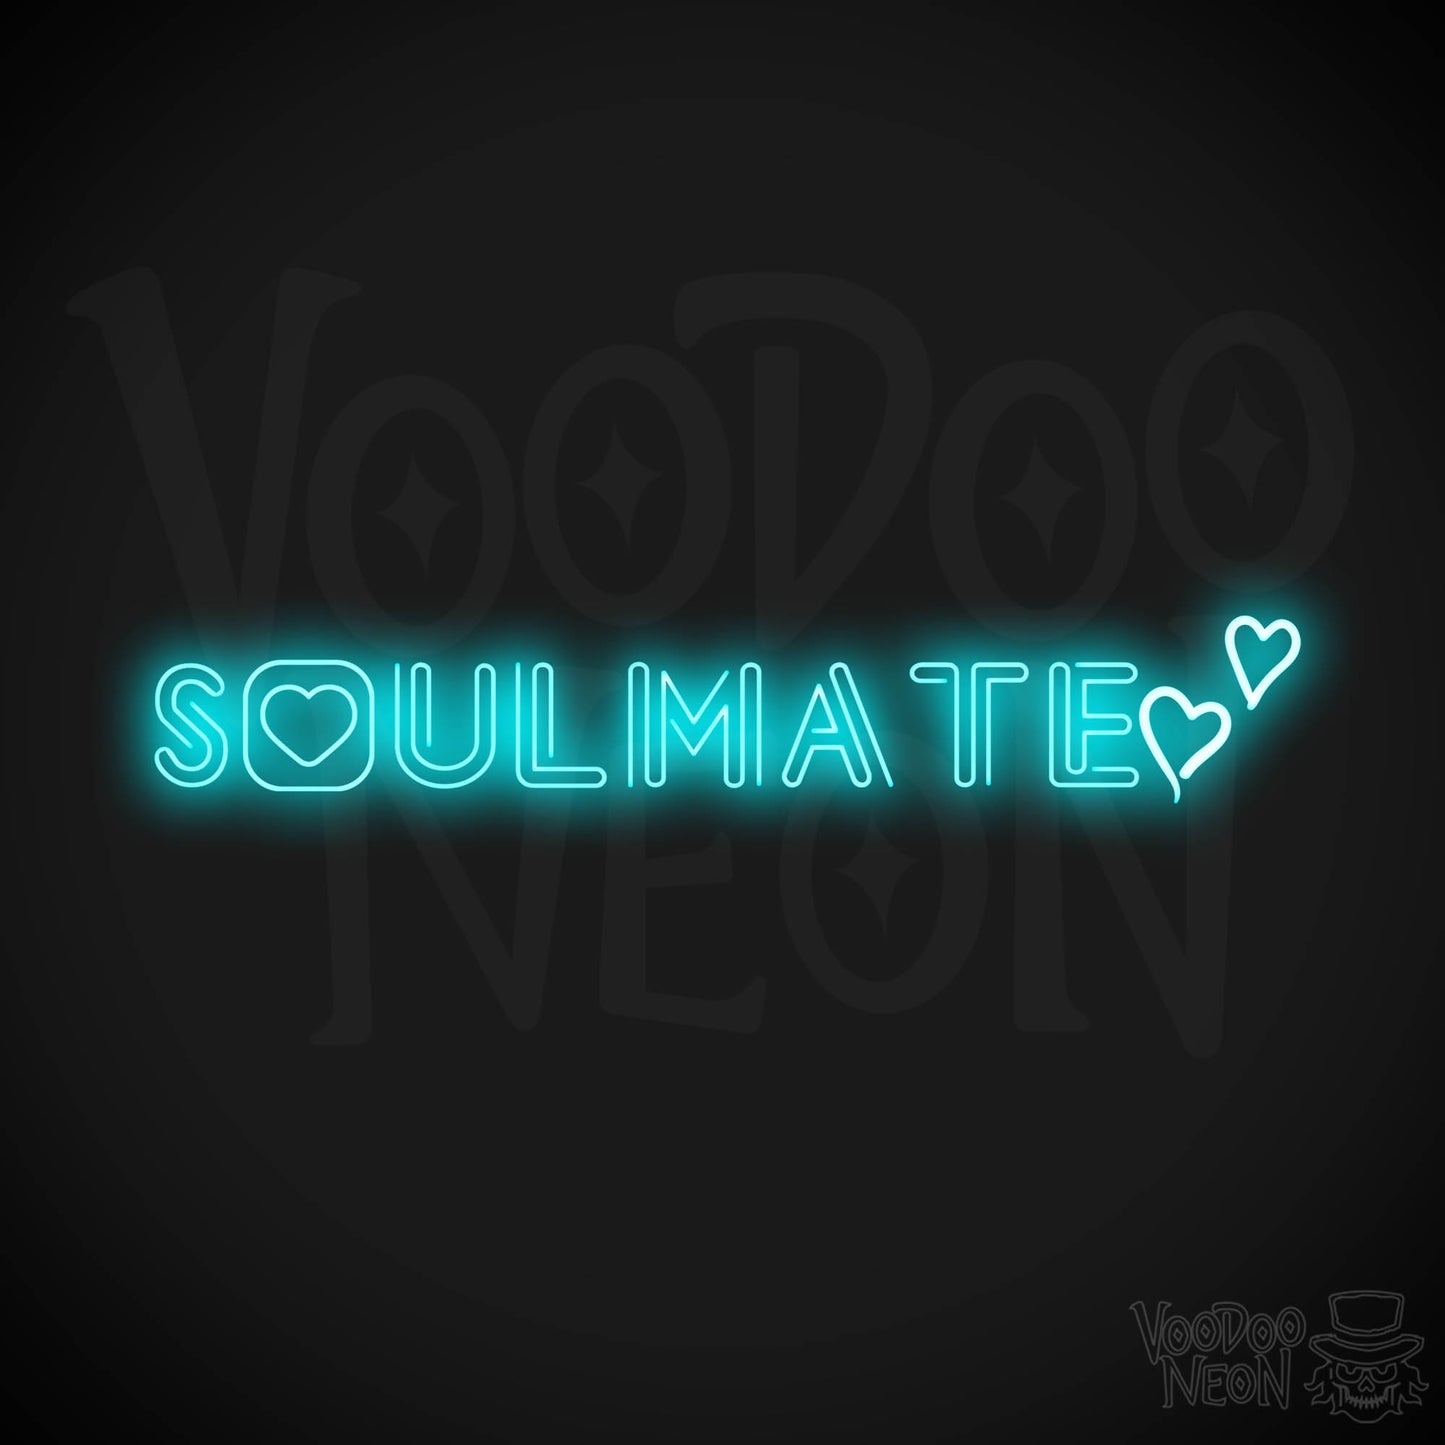 Soulmate Neon Sign - Neon Soulmate Sign - LED Neon Wall Art - Color Ice Blue